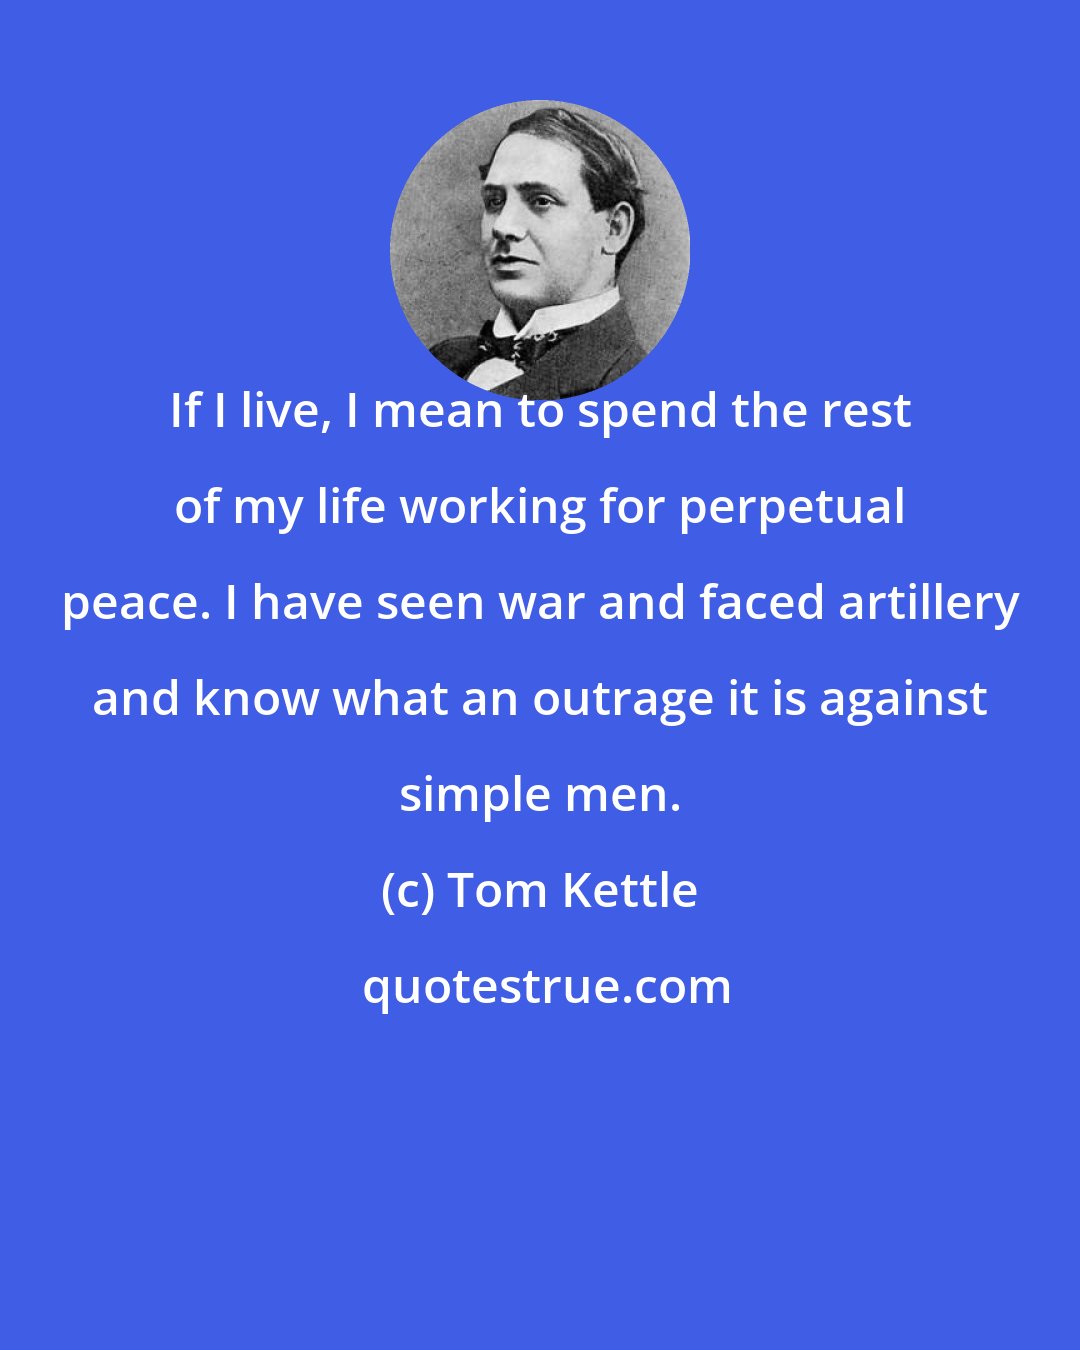 Tom Kettle: If I live, I mean to spend the rest of my life working for perpetual peace. I have seen war and faced artillery and know what an outrage it is against simple men.